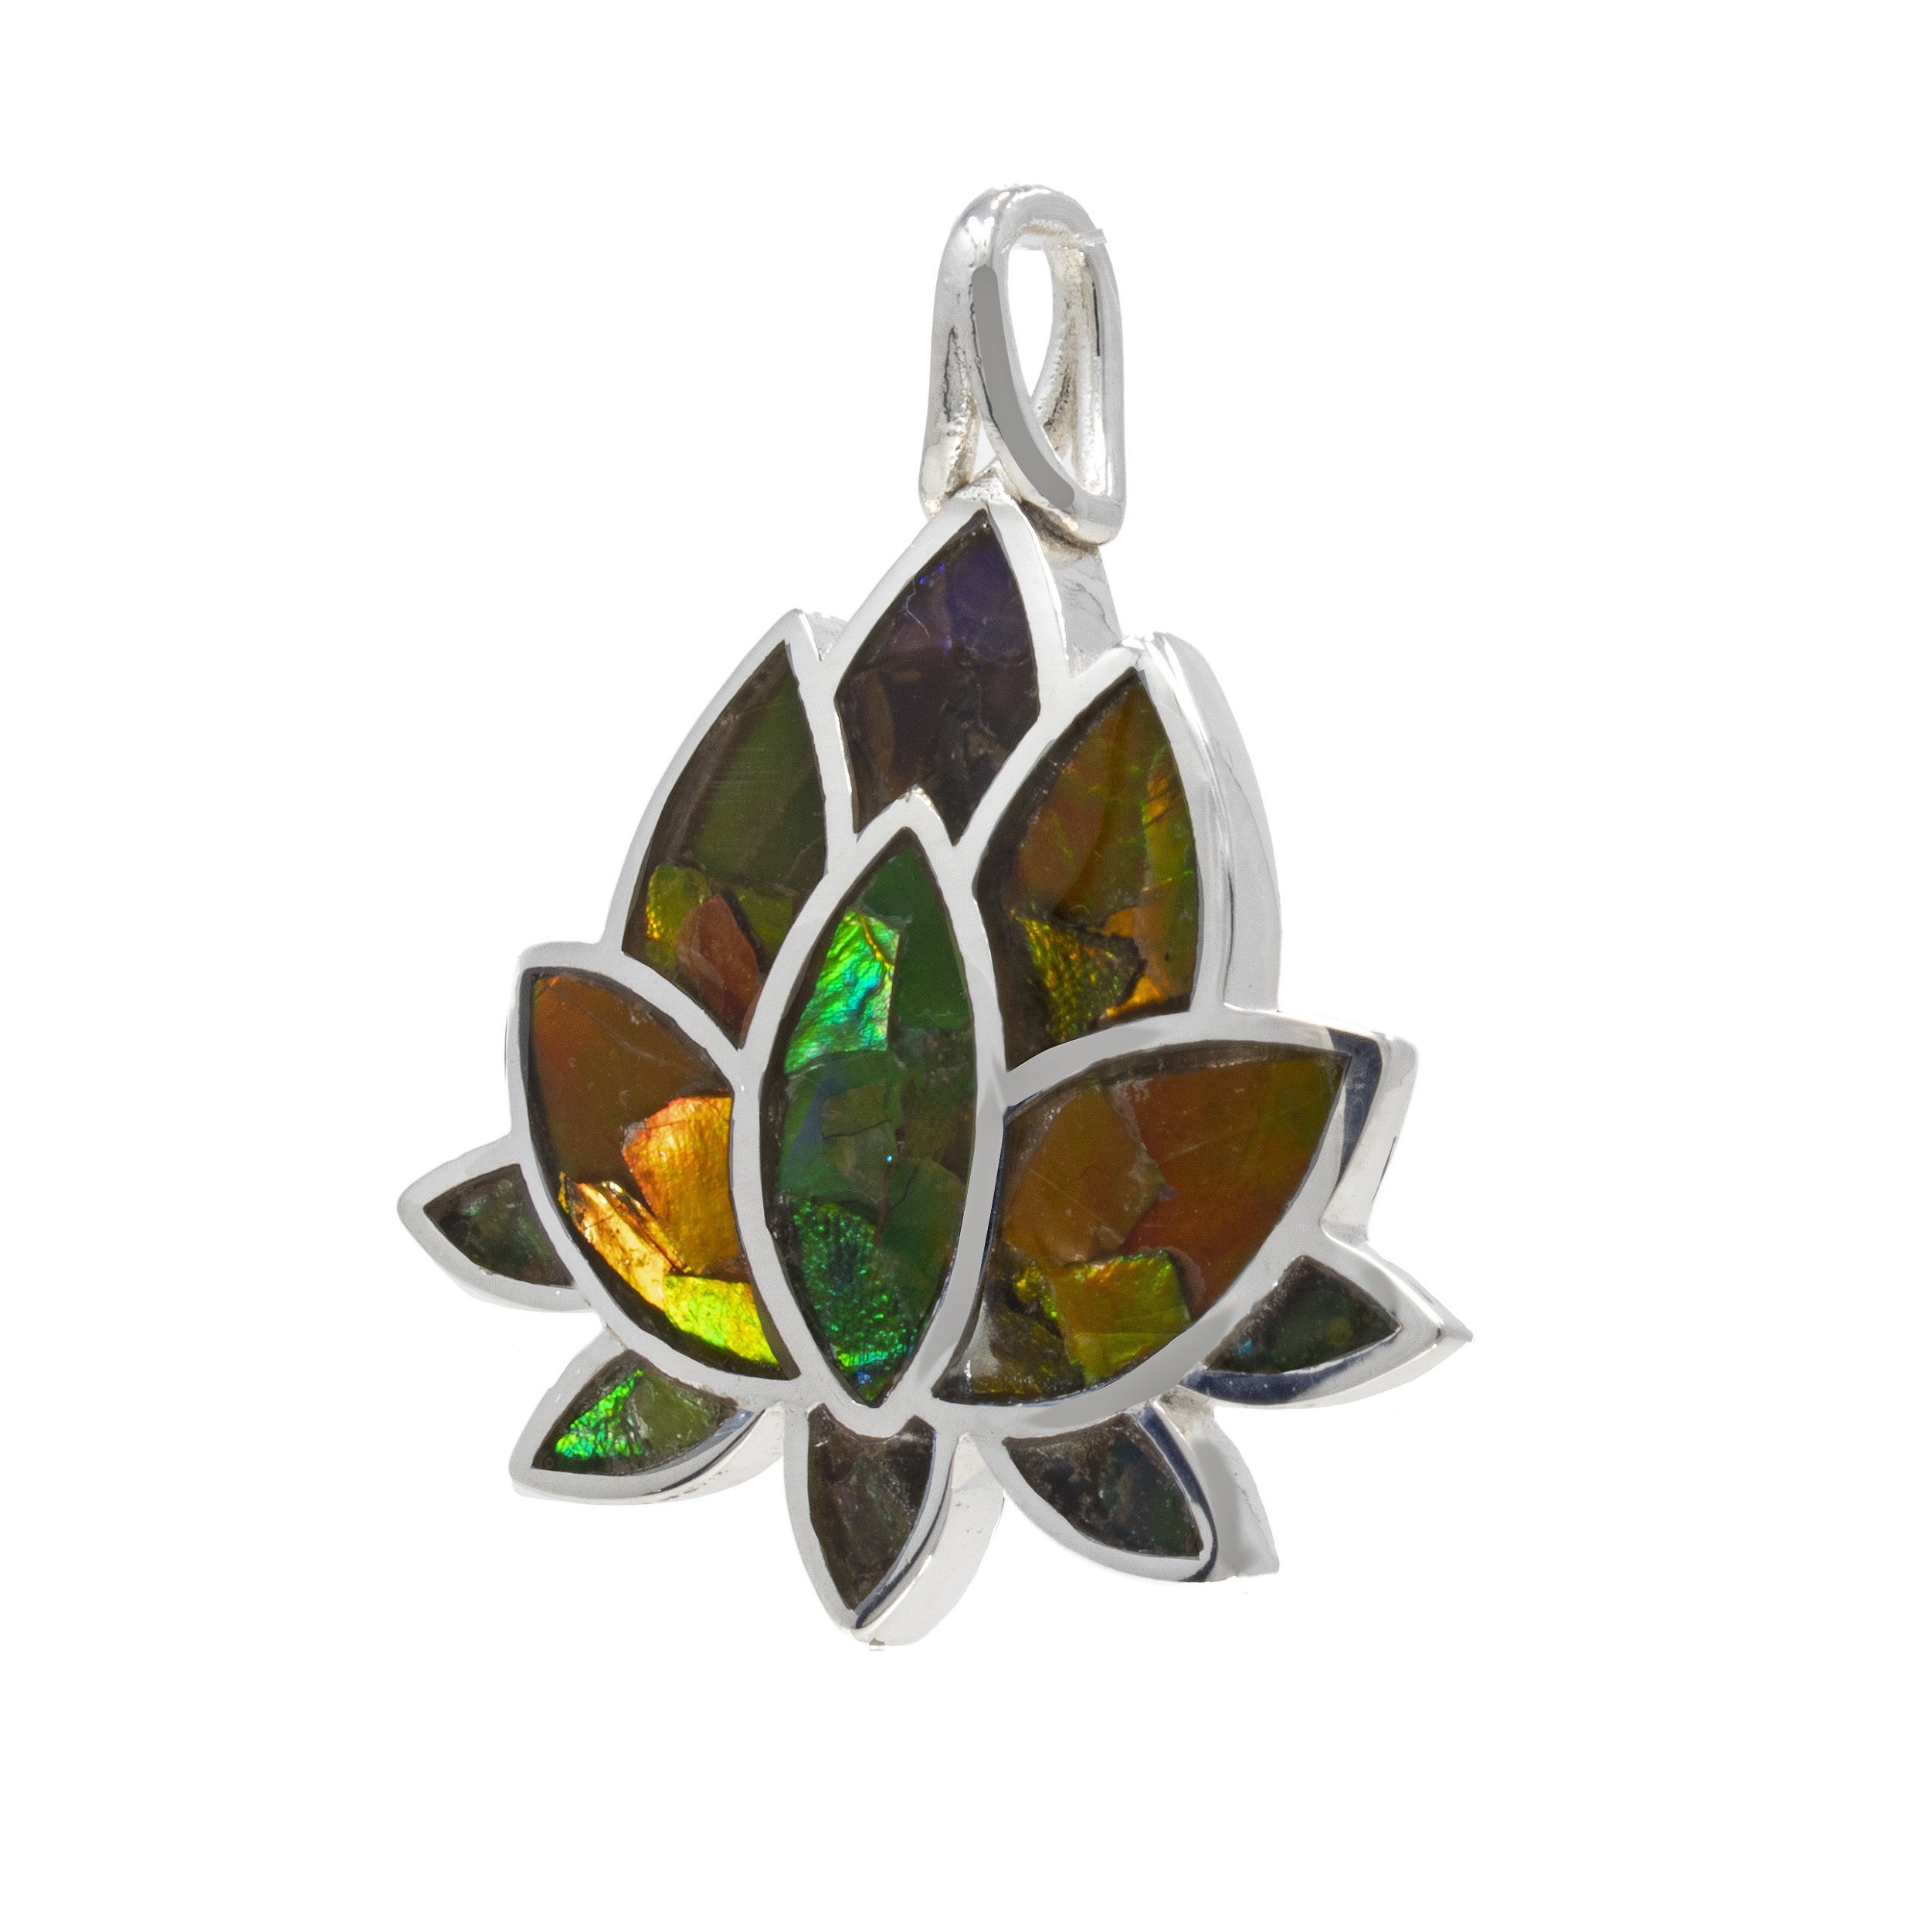 Ammolite Fossil Inlay Pendant - Lotus Flower With Silver Bezel